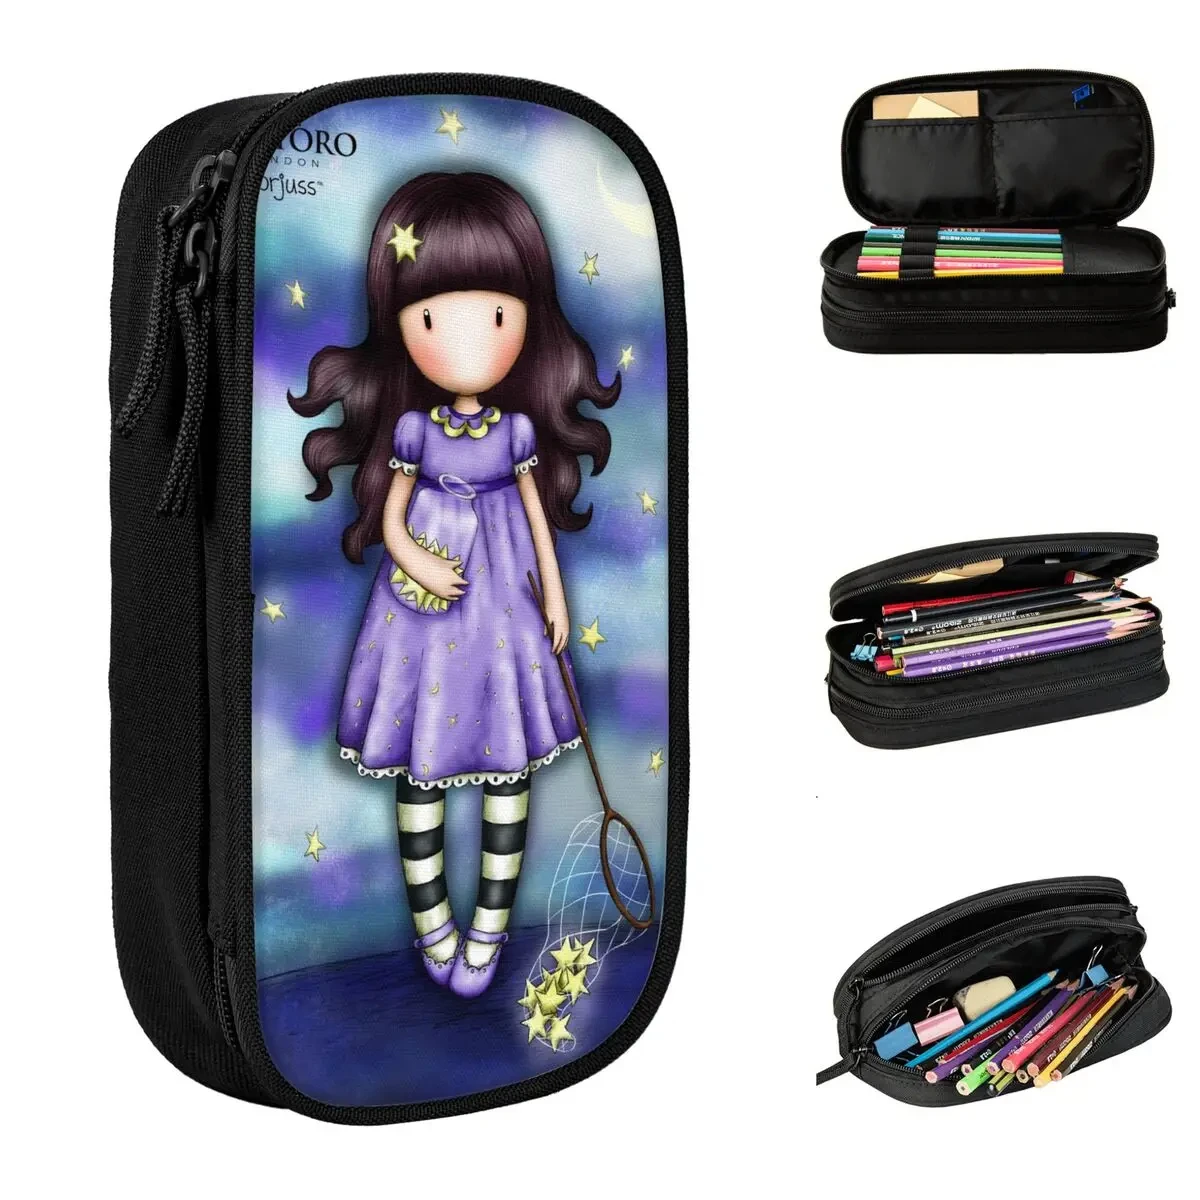 

Creative Santoro Gorjuss Pencil Case Moon Pencilcases Pen Box for Girl Boy Large Storage Bags Students School Gifts Stationery